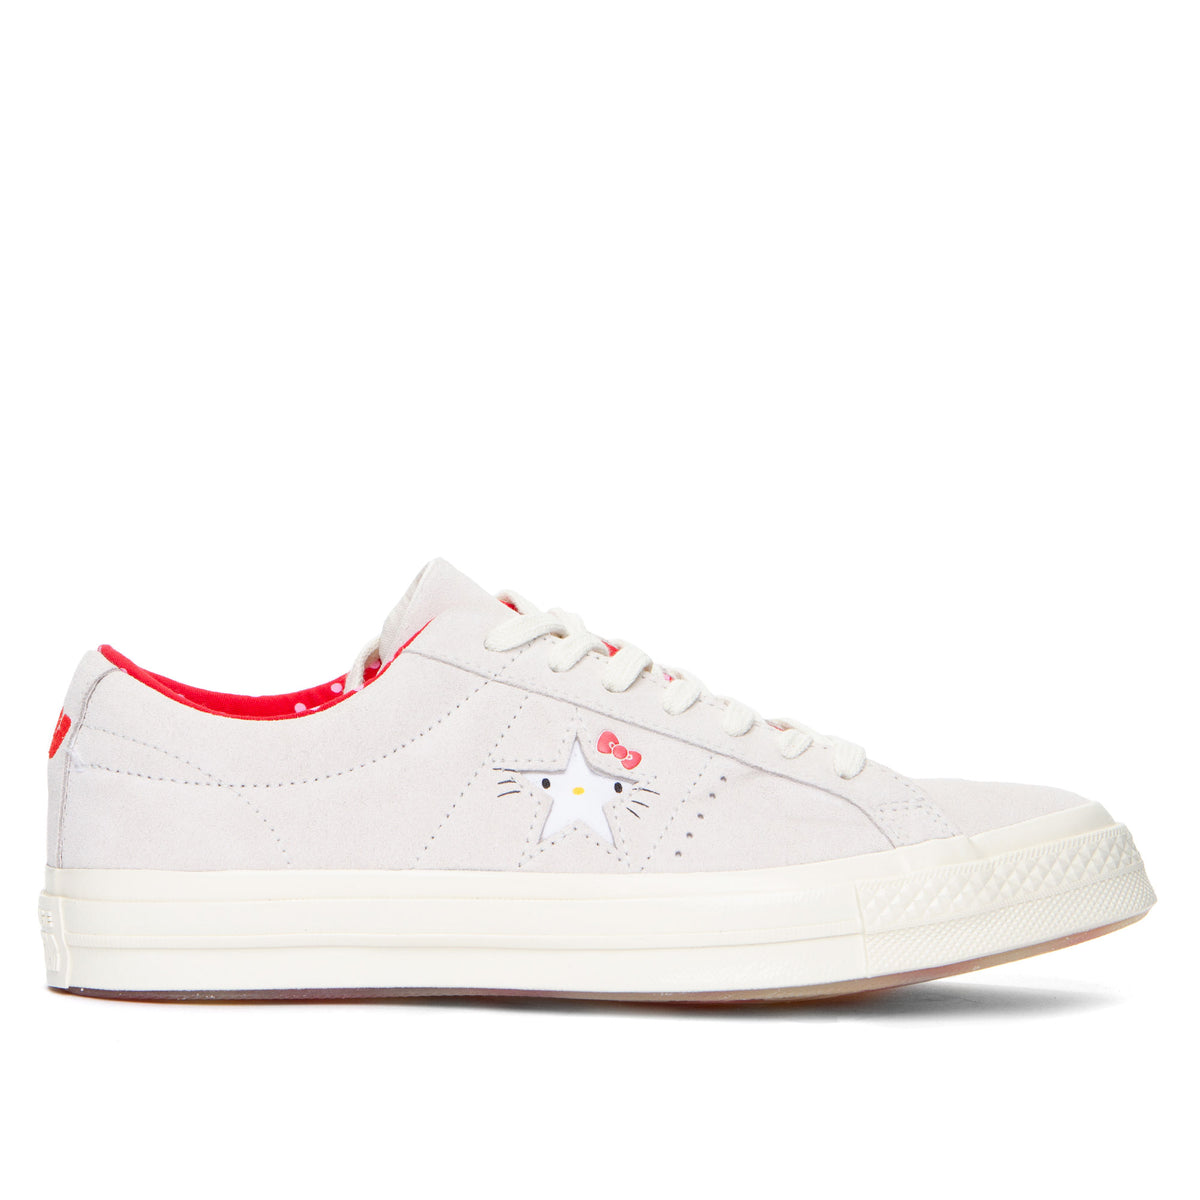 Converse X Hello Kitty One Star Suede